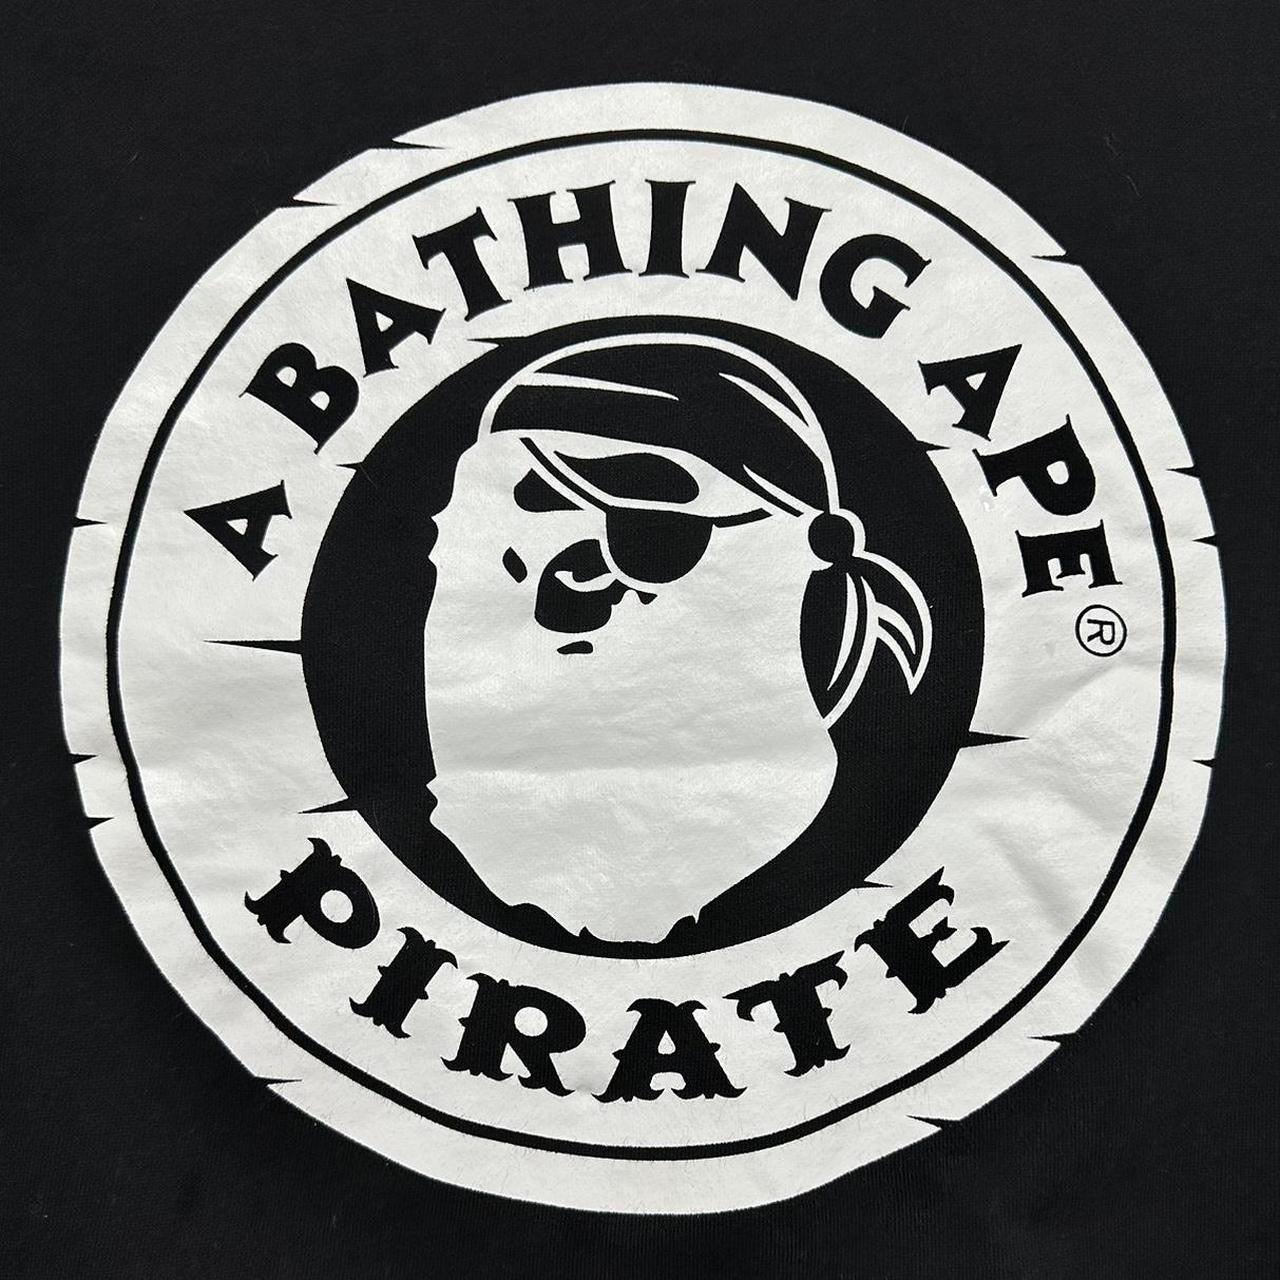 Bape Pirate Front Print Pullover Crewneck - Known Source